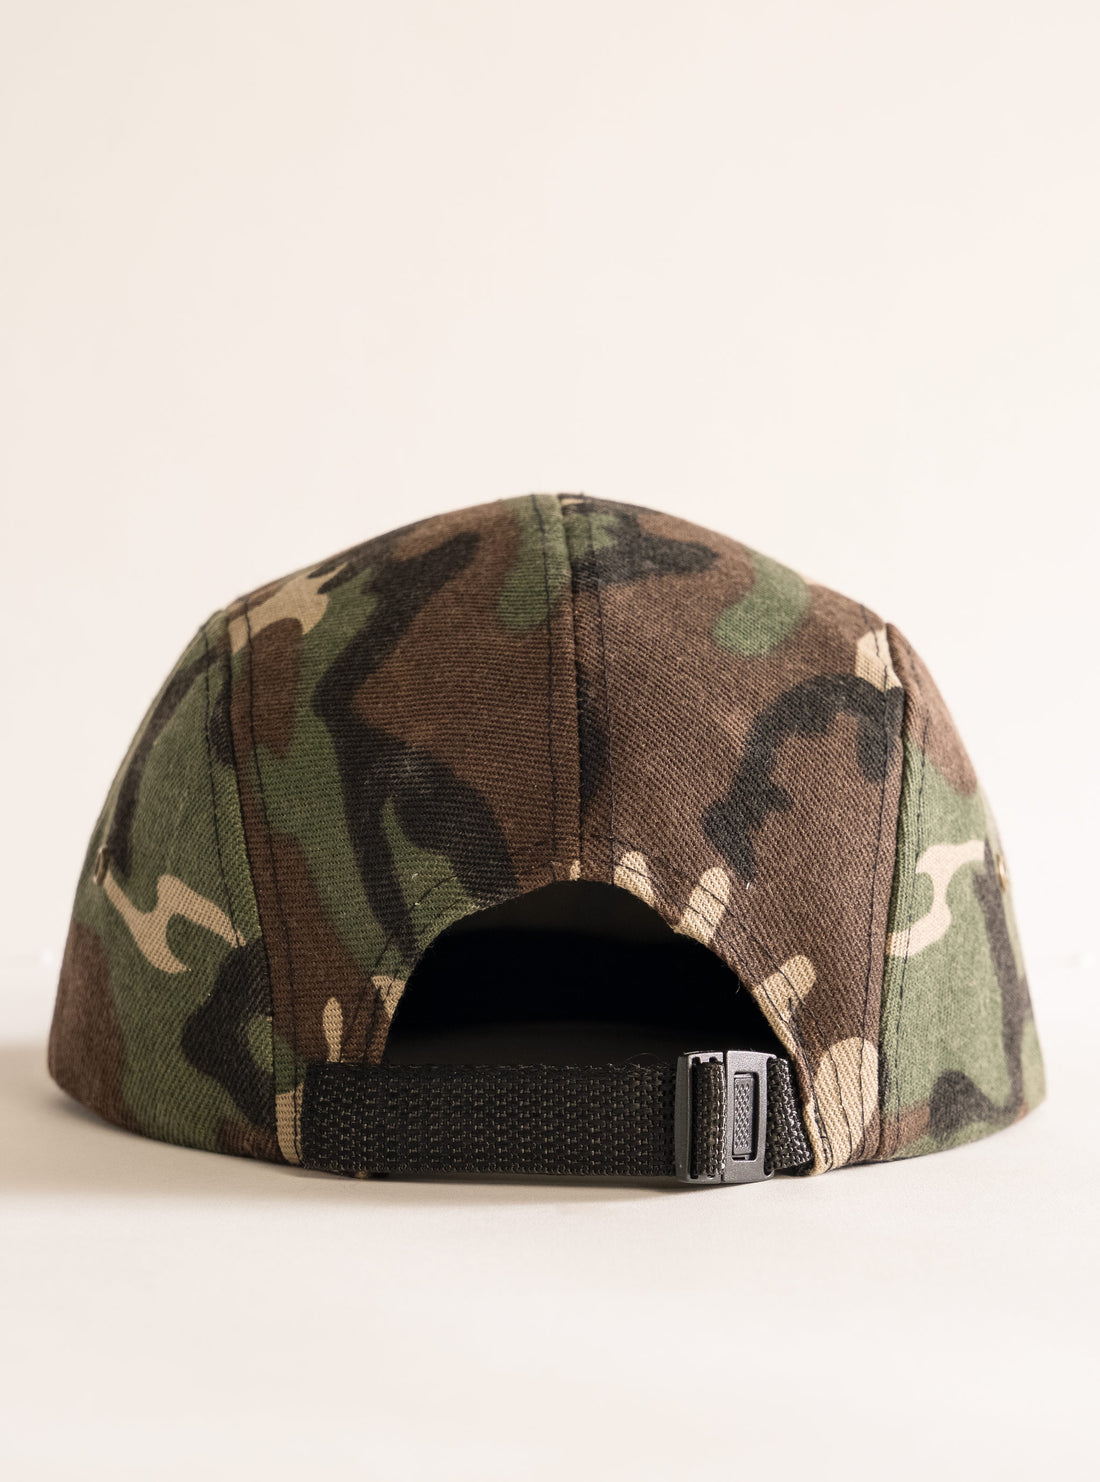 Move Your Self Snapback Gorra, Verde Obscuro